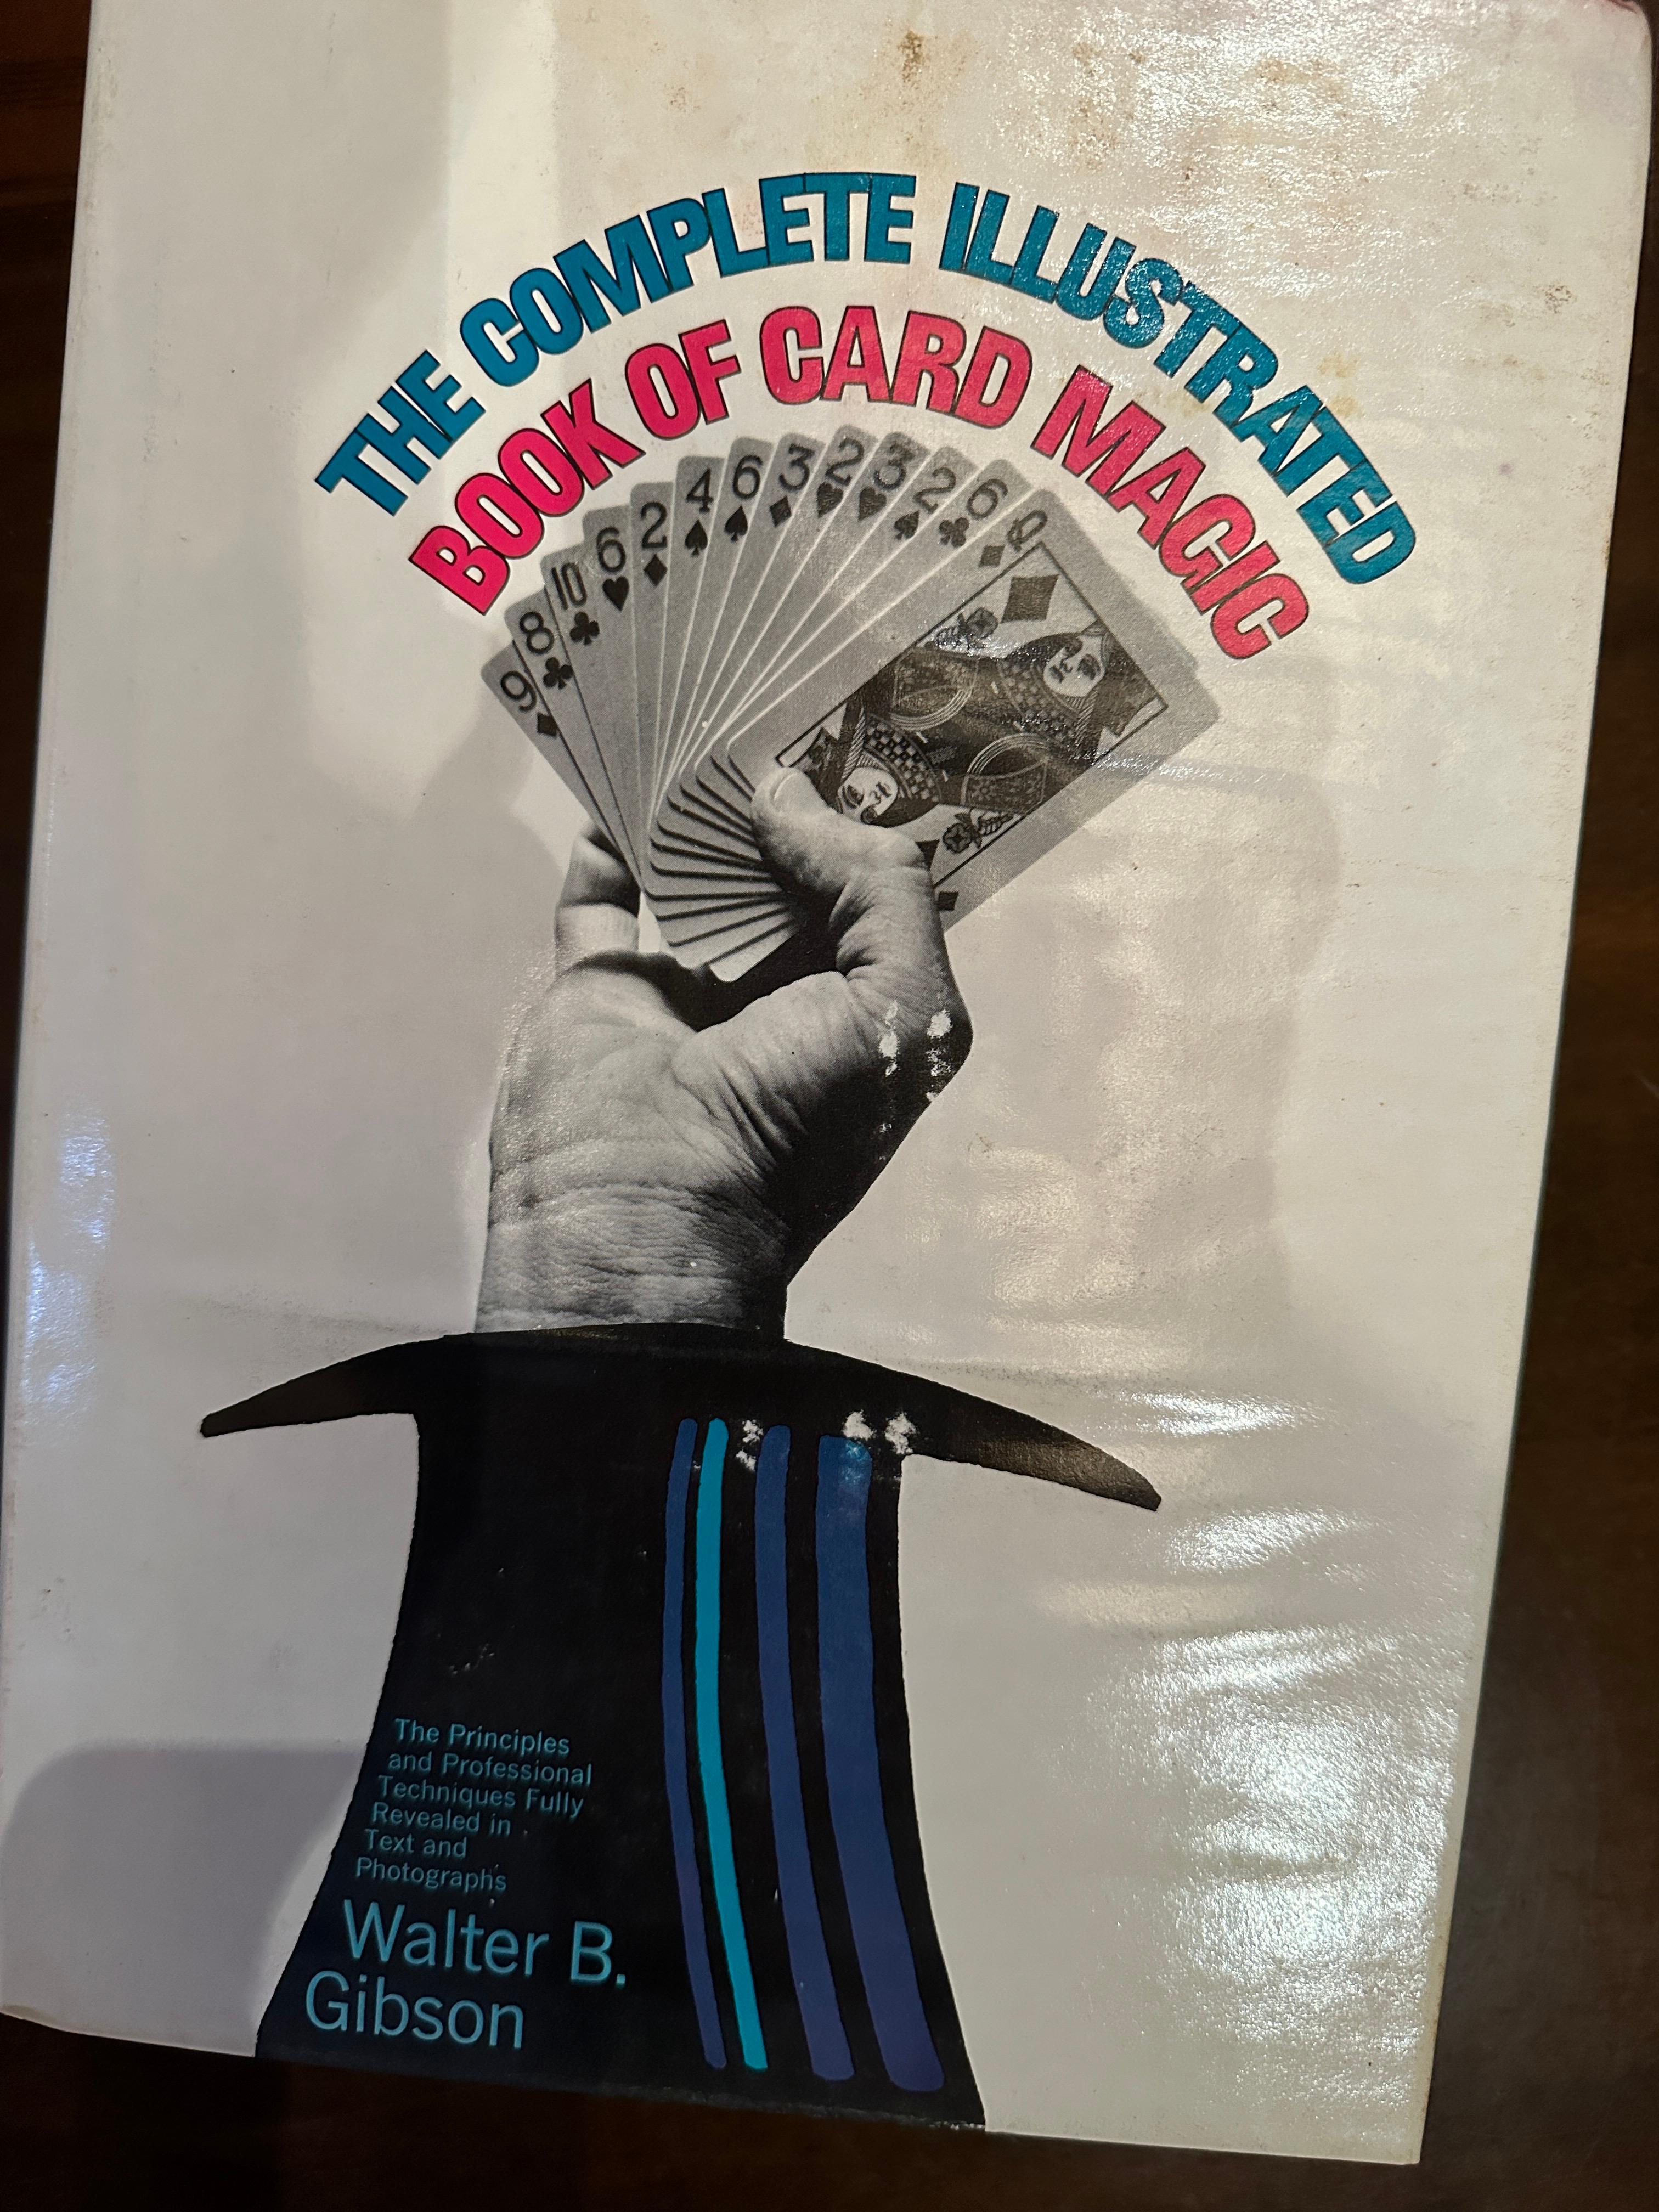 The Complete Illustrated Book of Card Magic by Walter B. Gibson 1969

This is not one of the many reprints issued later.  This is the actual book from 1969!

Mr. Gibson wrote dozens of great books on magic and many other topics and also ghost-wrote